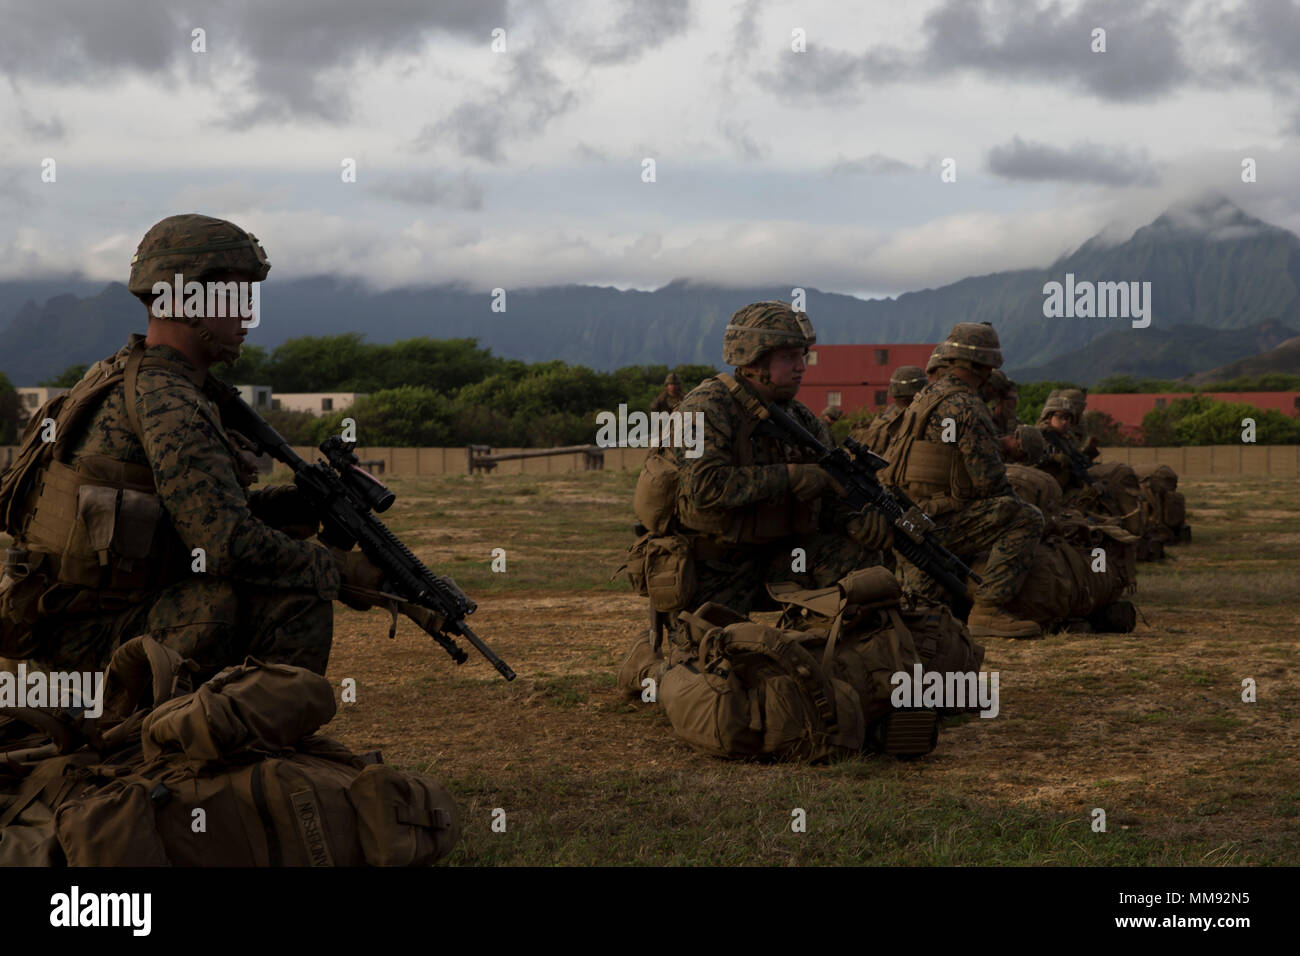 U.S. Marines with 3rd Battalion, 3rd Marine Regiment, provide security during the retrograde of personnel from Exercise Bougainville II  at Marine Corps Air station Kaneohe Bay, Sept. 15, 2017. The exercise prepares the Marines for service as a forward deployed force in the Pacific by training them to fight as a Ground Combat Element in a Marine Air-Ground Task Force. (Marine Corps Photo by: Sgt. Alex Kouns) Stock Photo